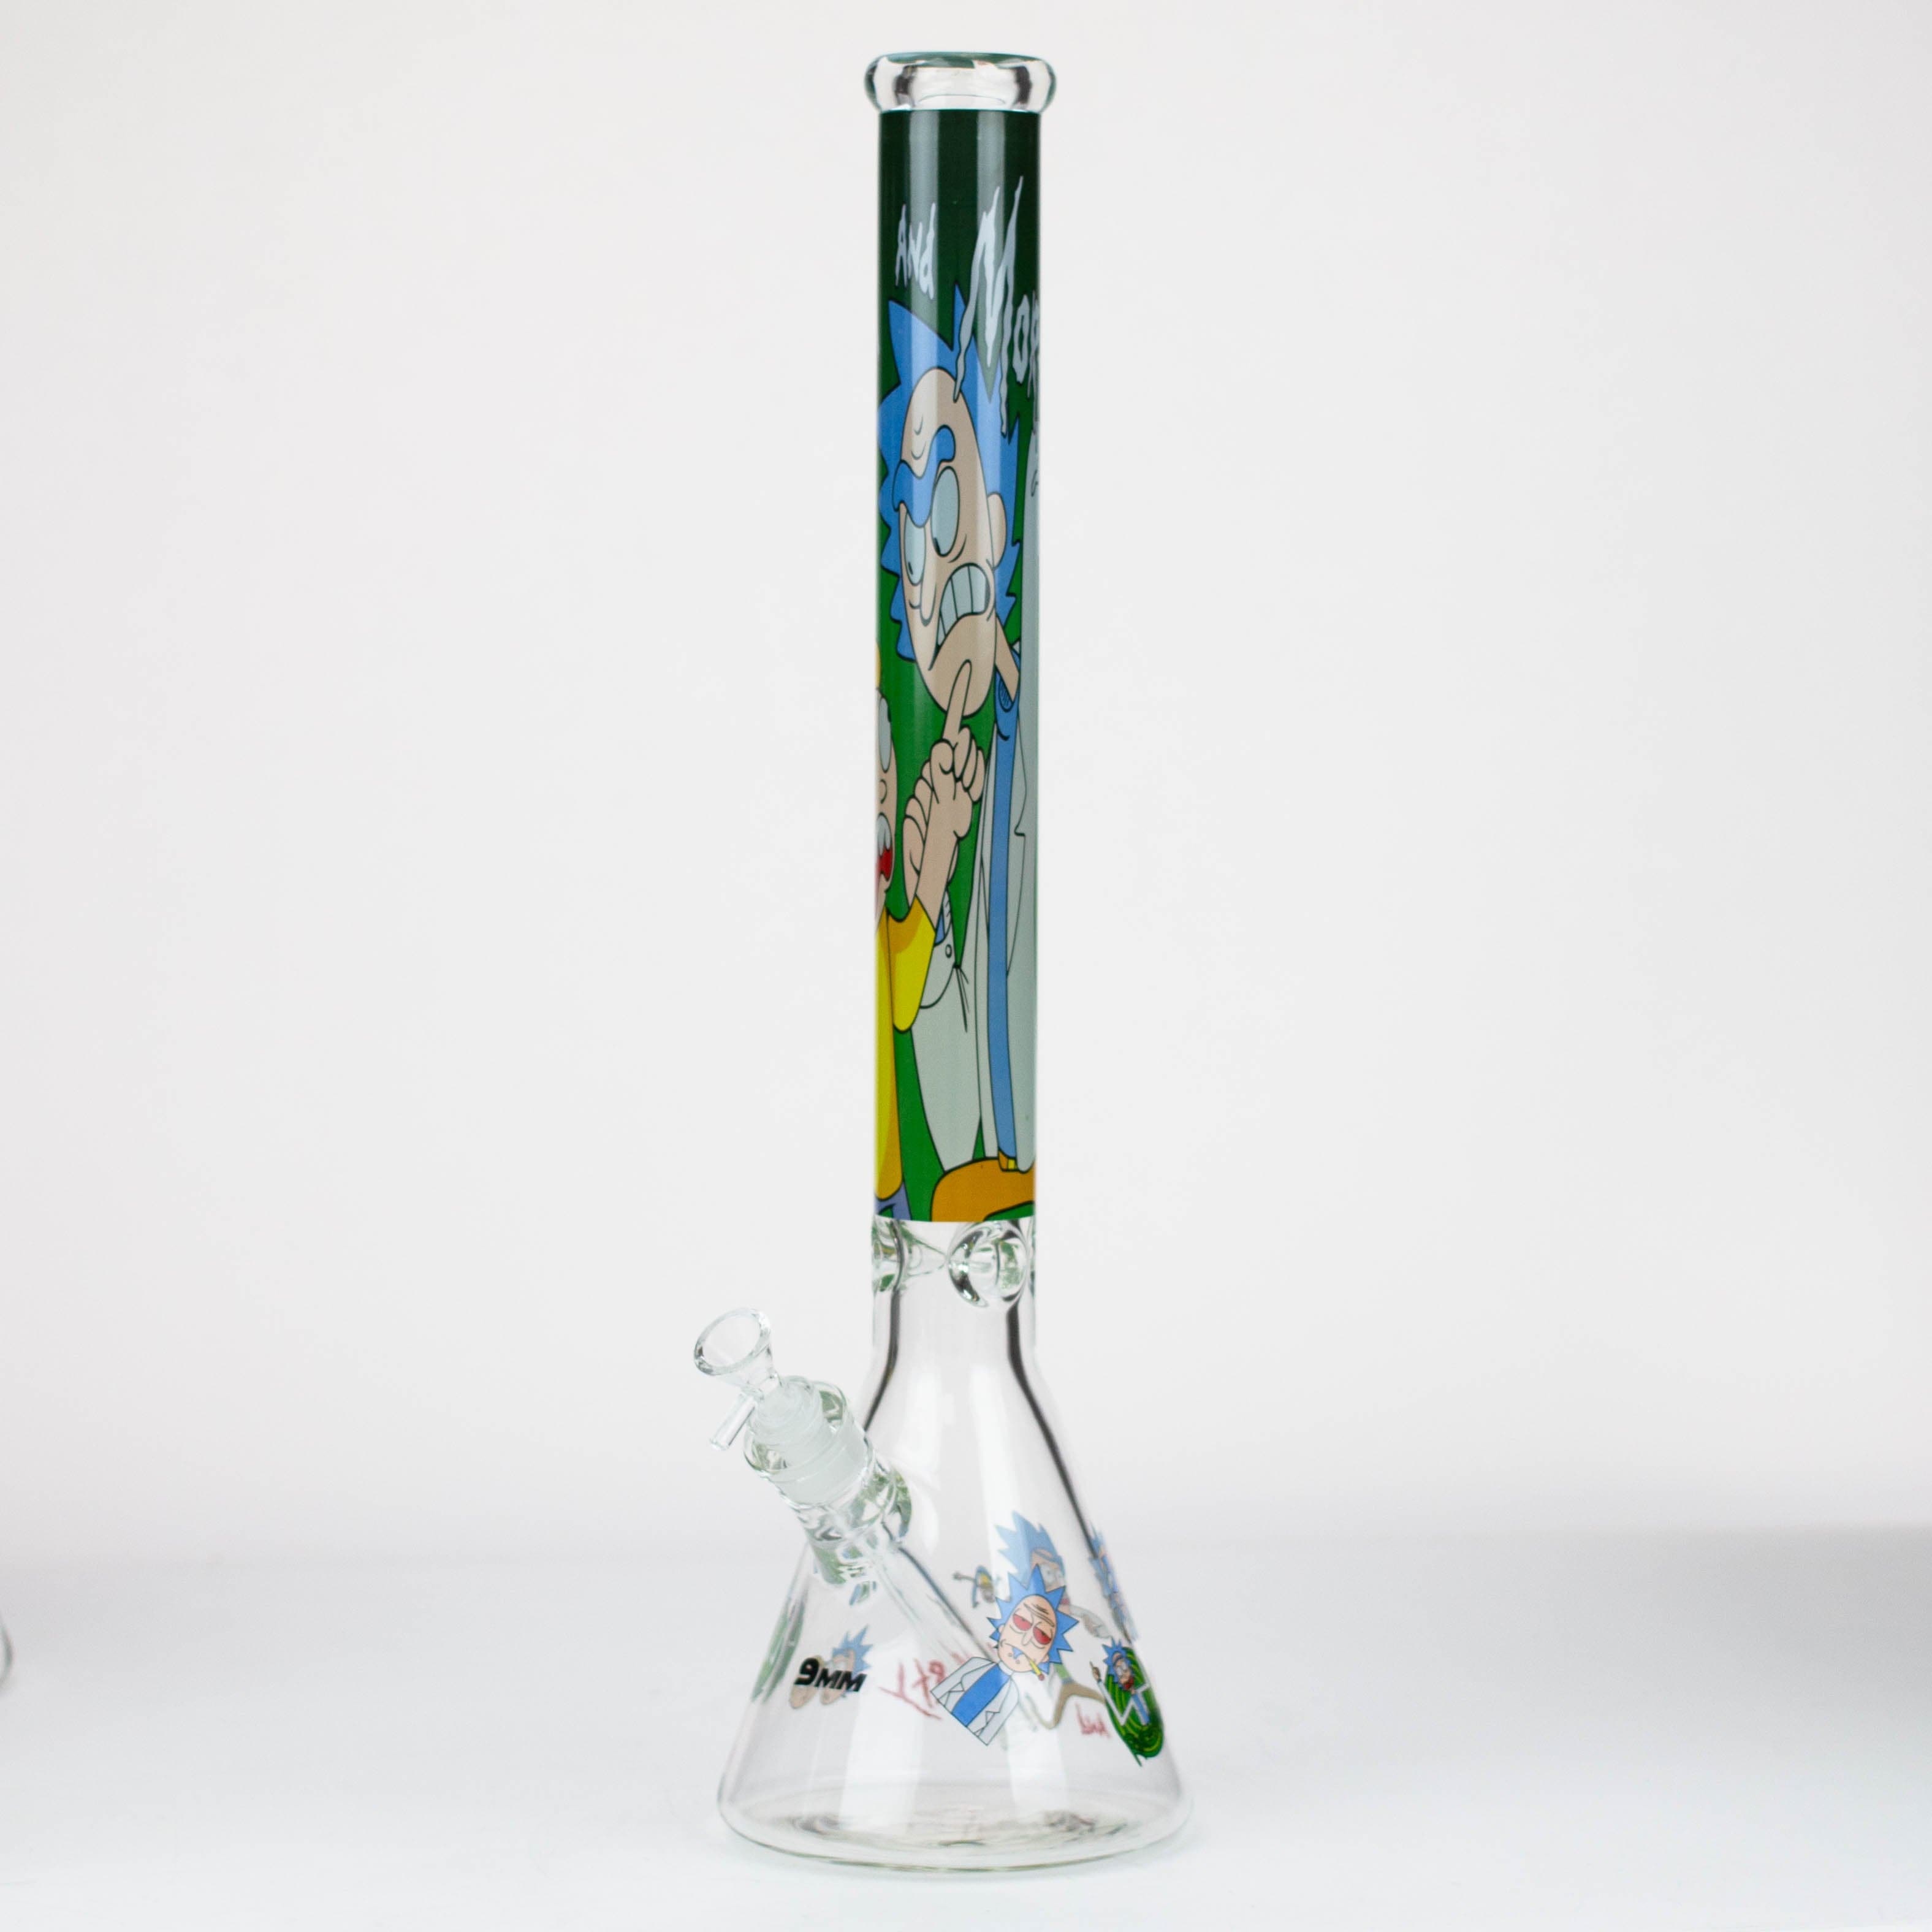 RM Cartoon 9 mm glass water pipes 22"_9